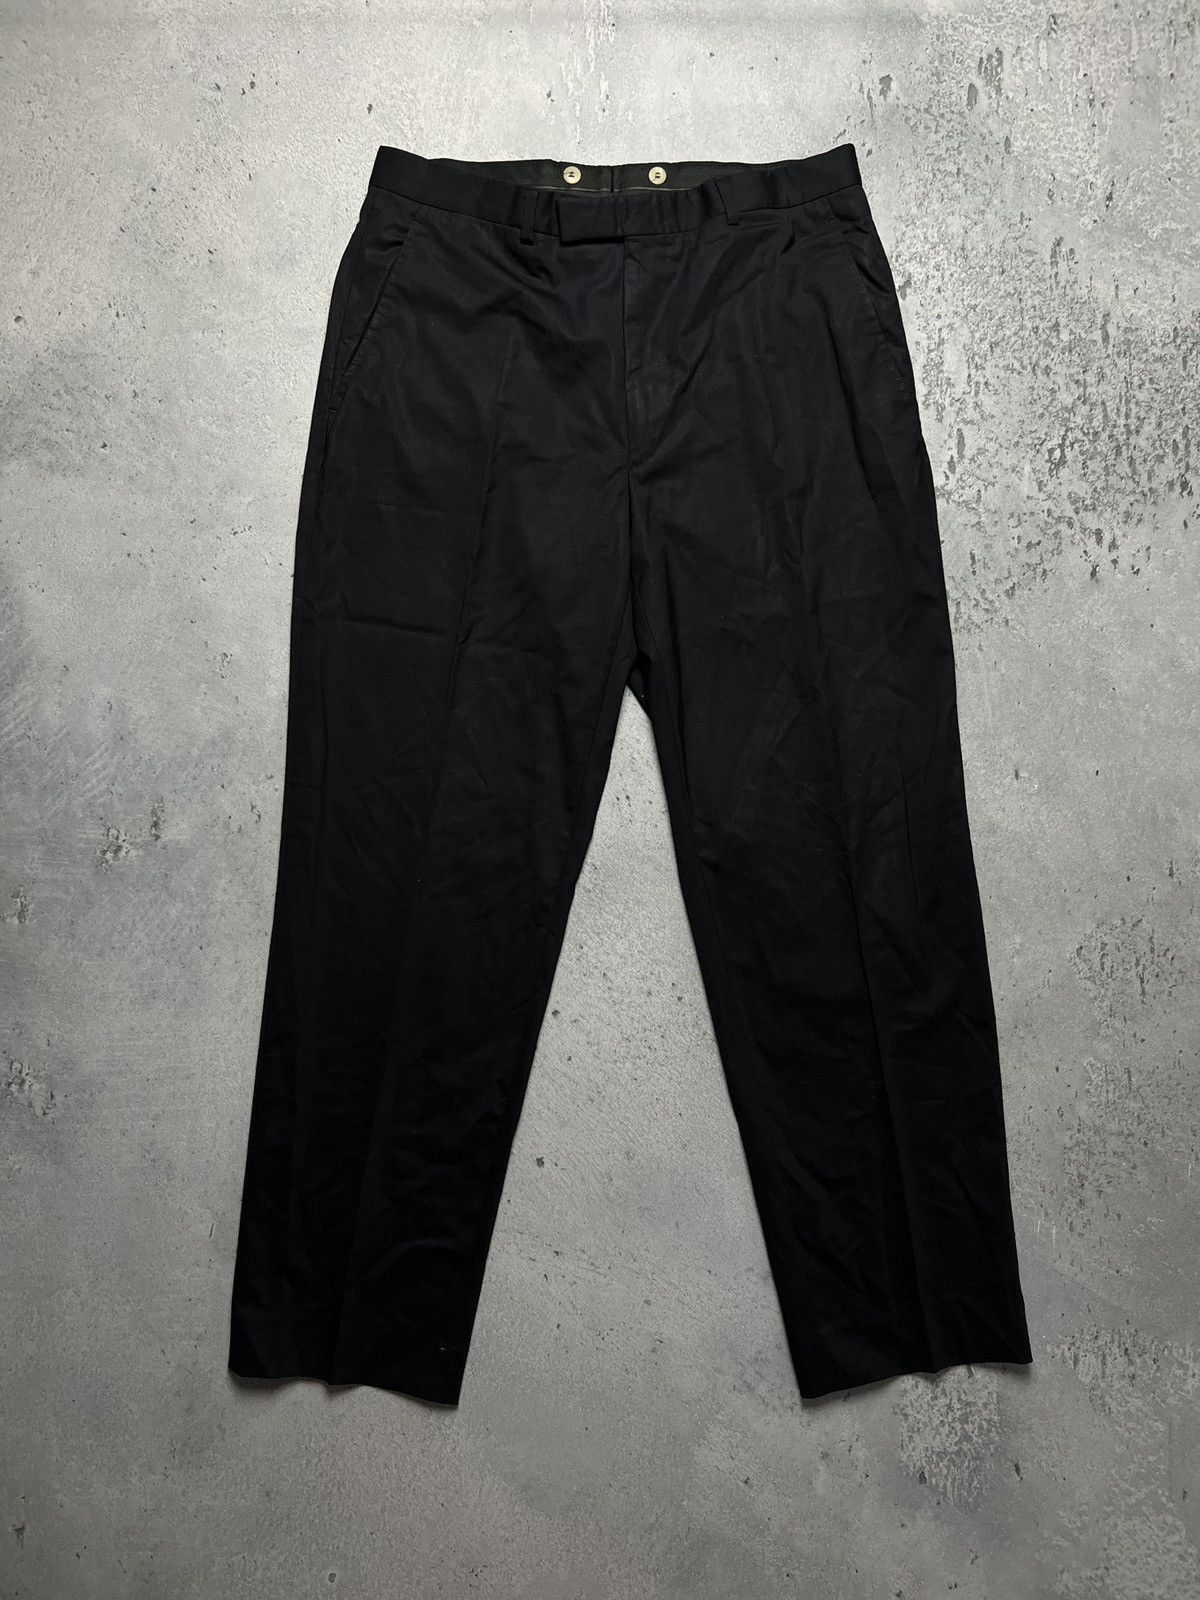 Gucci Gucci by Tom Ford Wide-Leg Trouser 90s 00s Vintage Lux Rare Size 50R - 1 Preview